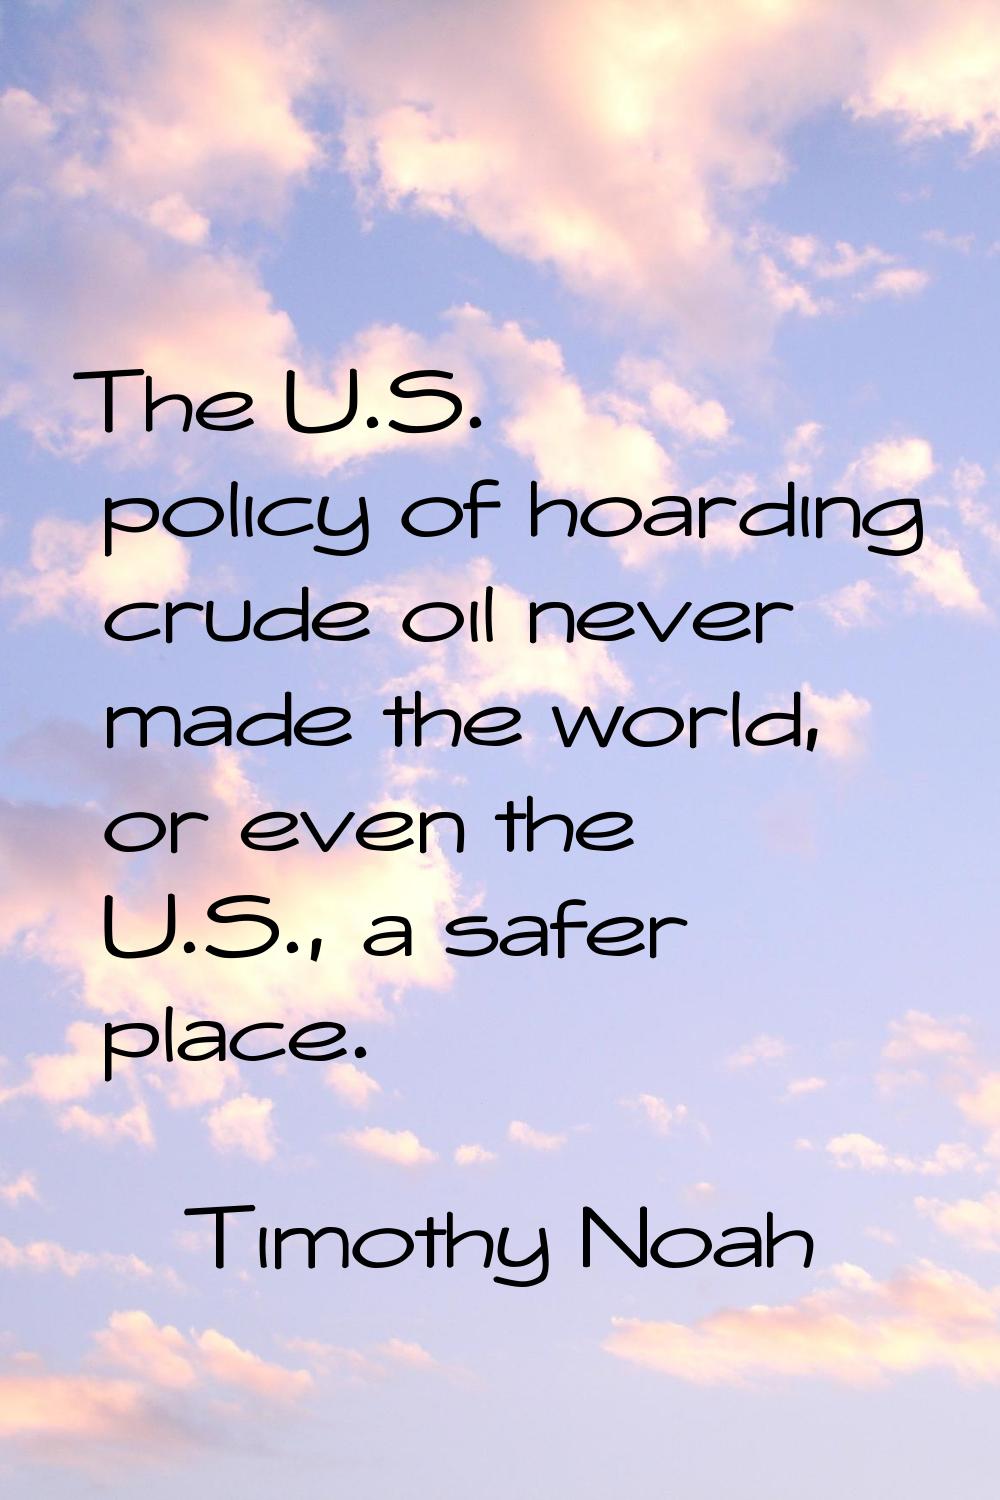 The U.S. policy of hoarding crude oil never made the world, or even the U.S., a safer place.